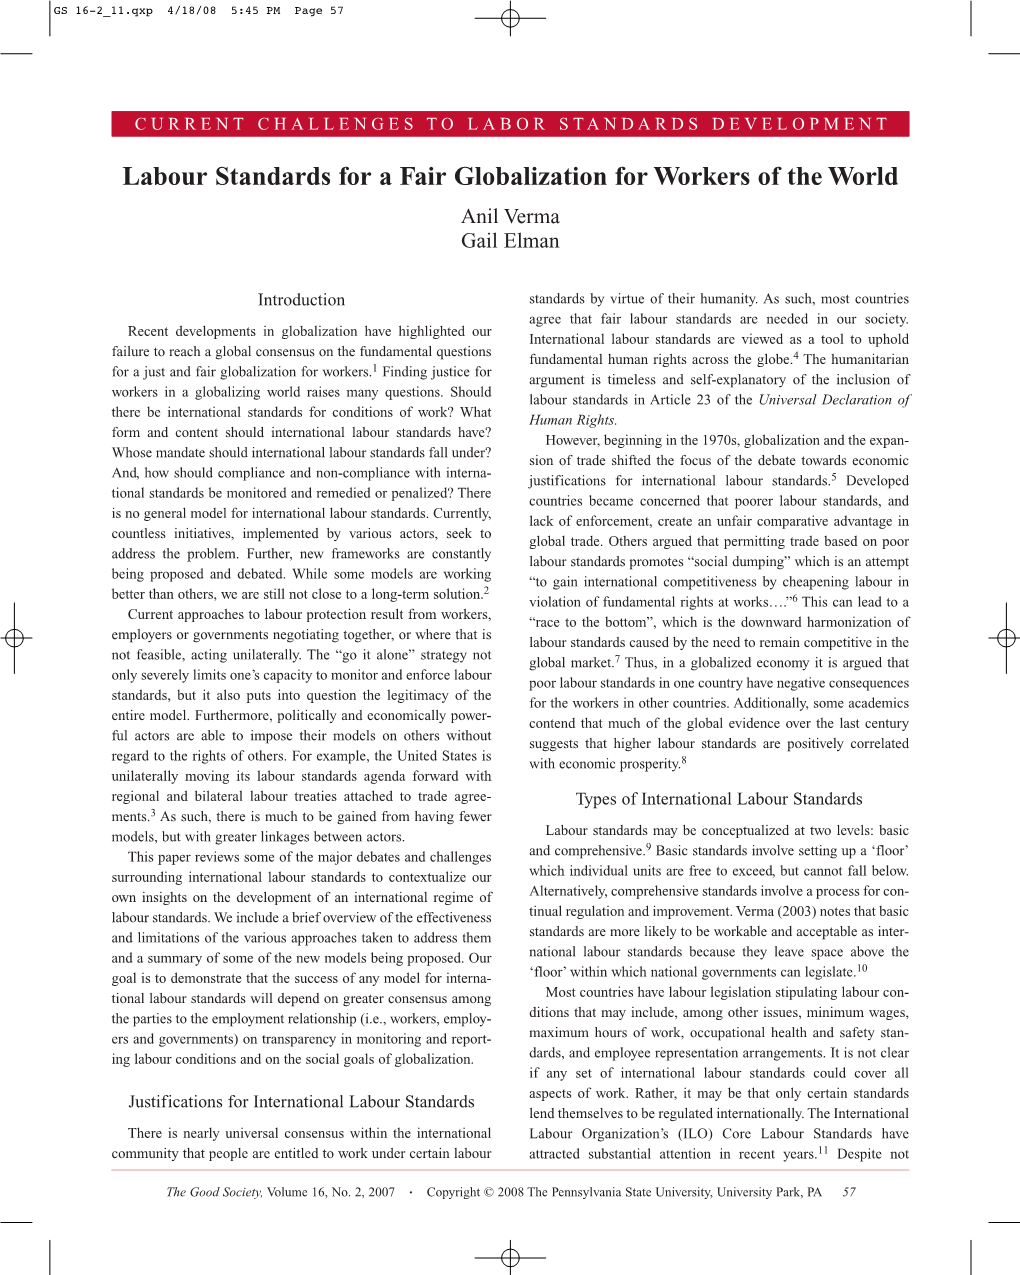 Labour Standards for a Fair Globalization for Workers of the World Anil Verma Gail Elman